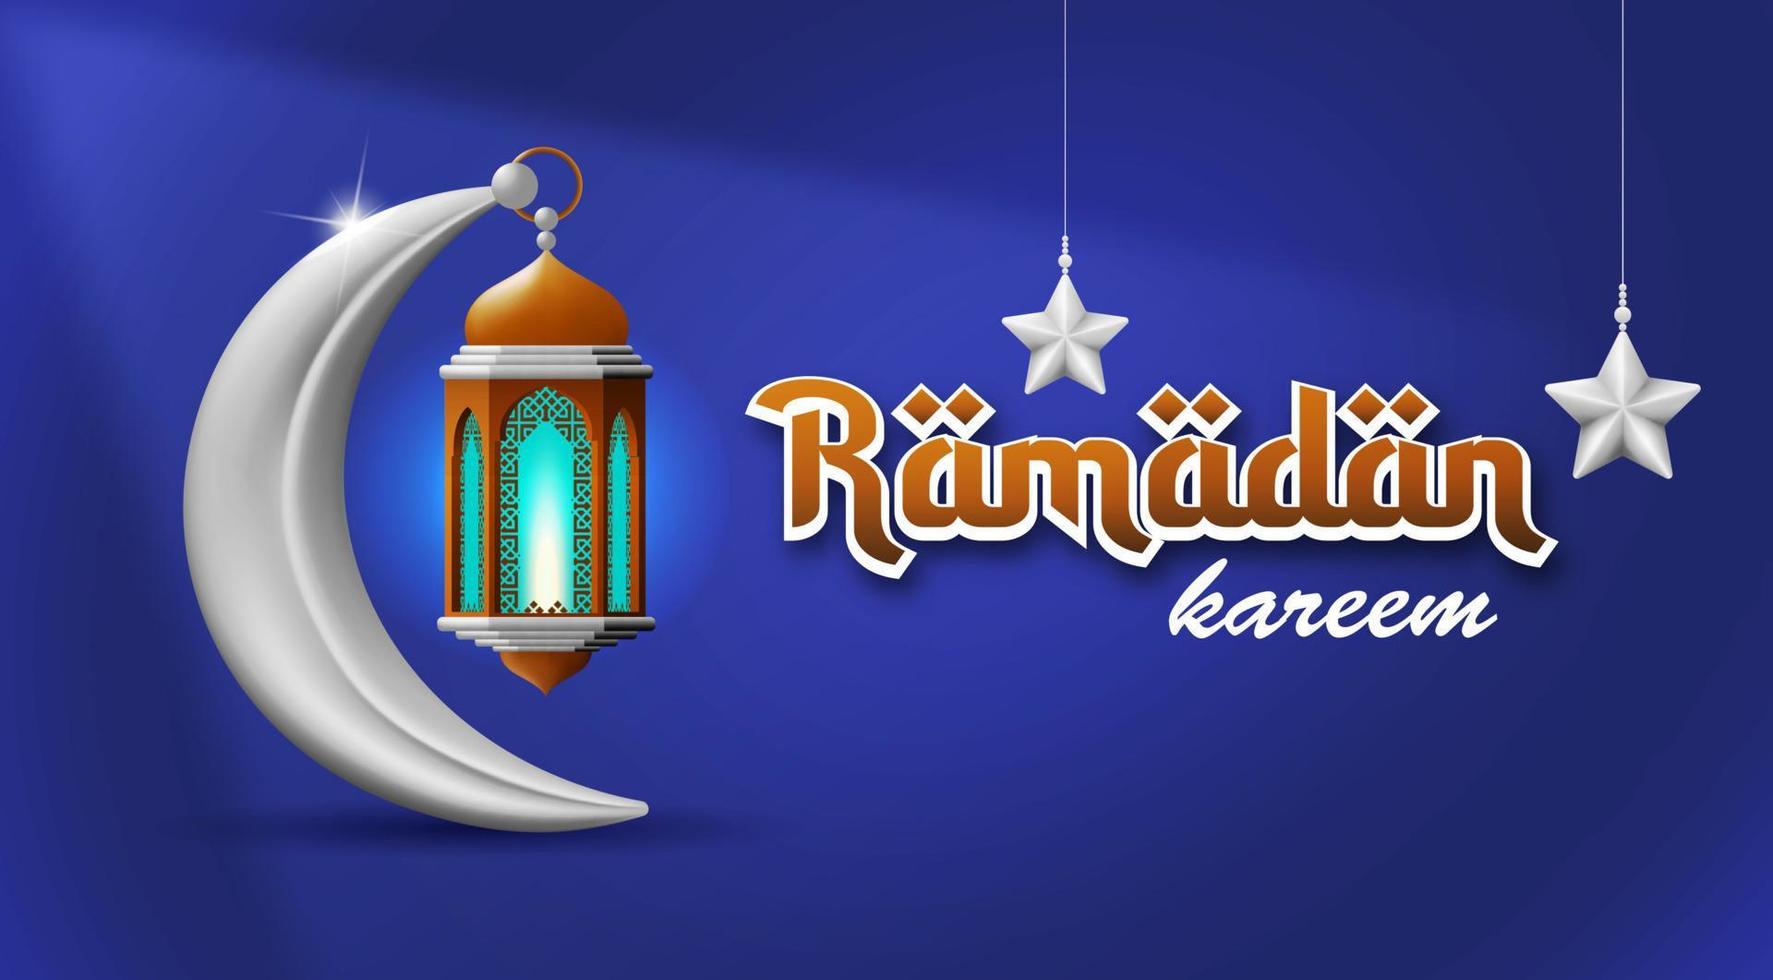 ramadan greeting card. Islamic celebration banner decorated with moon, lantern and stars. isolated on blue background. vector illustration